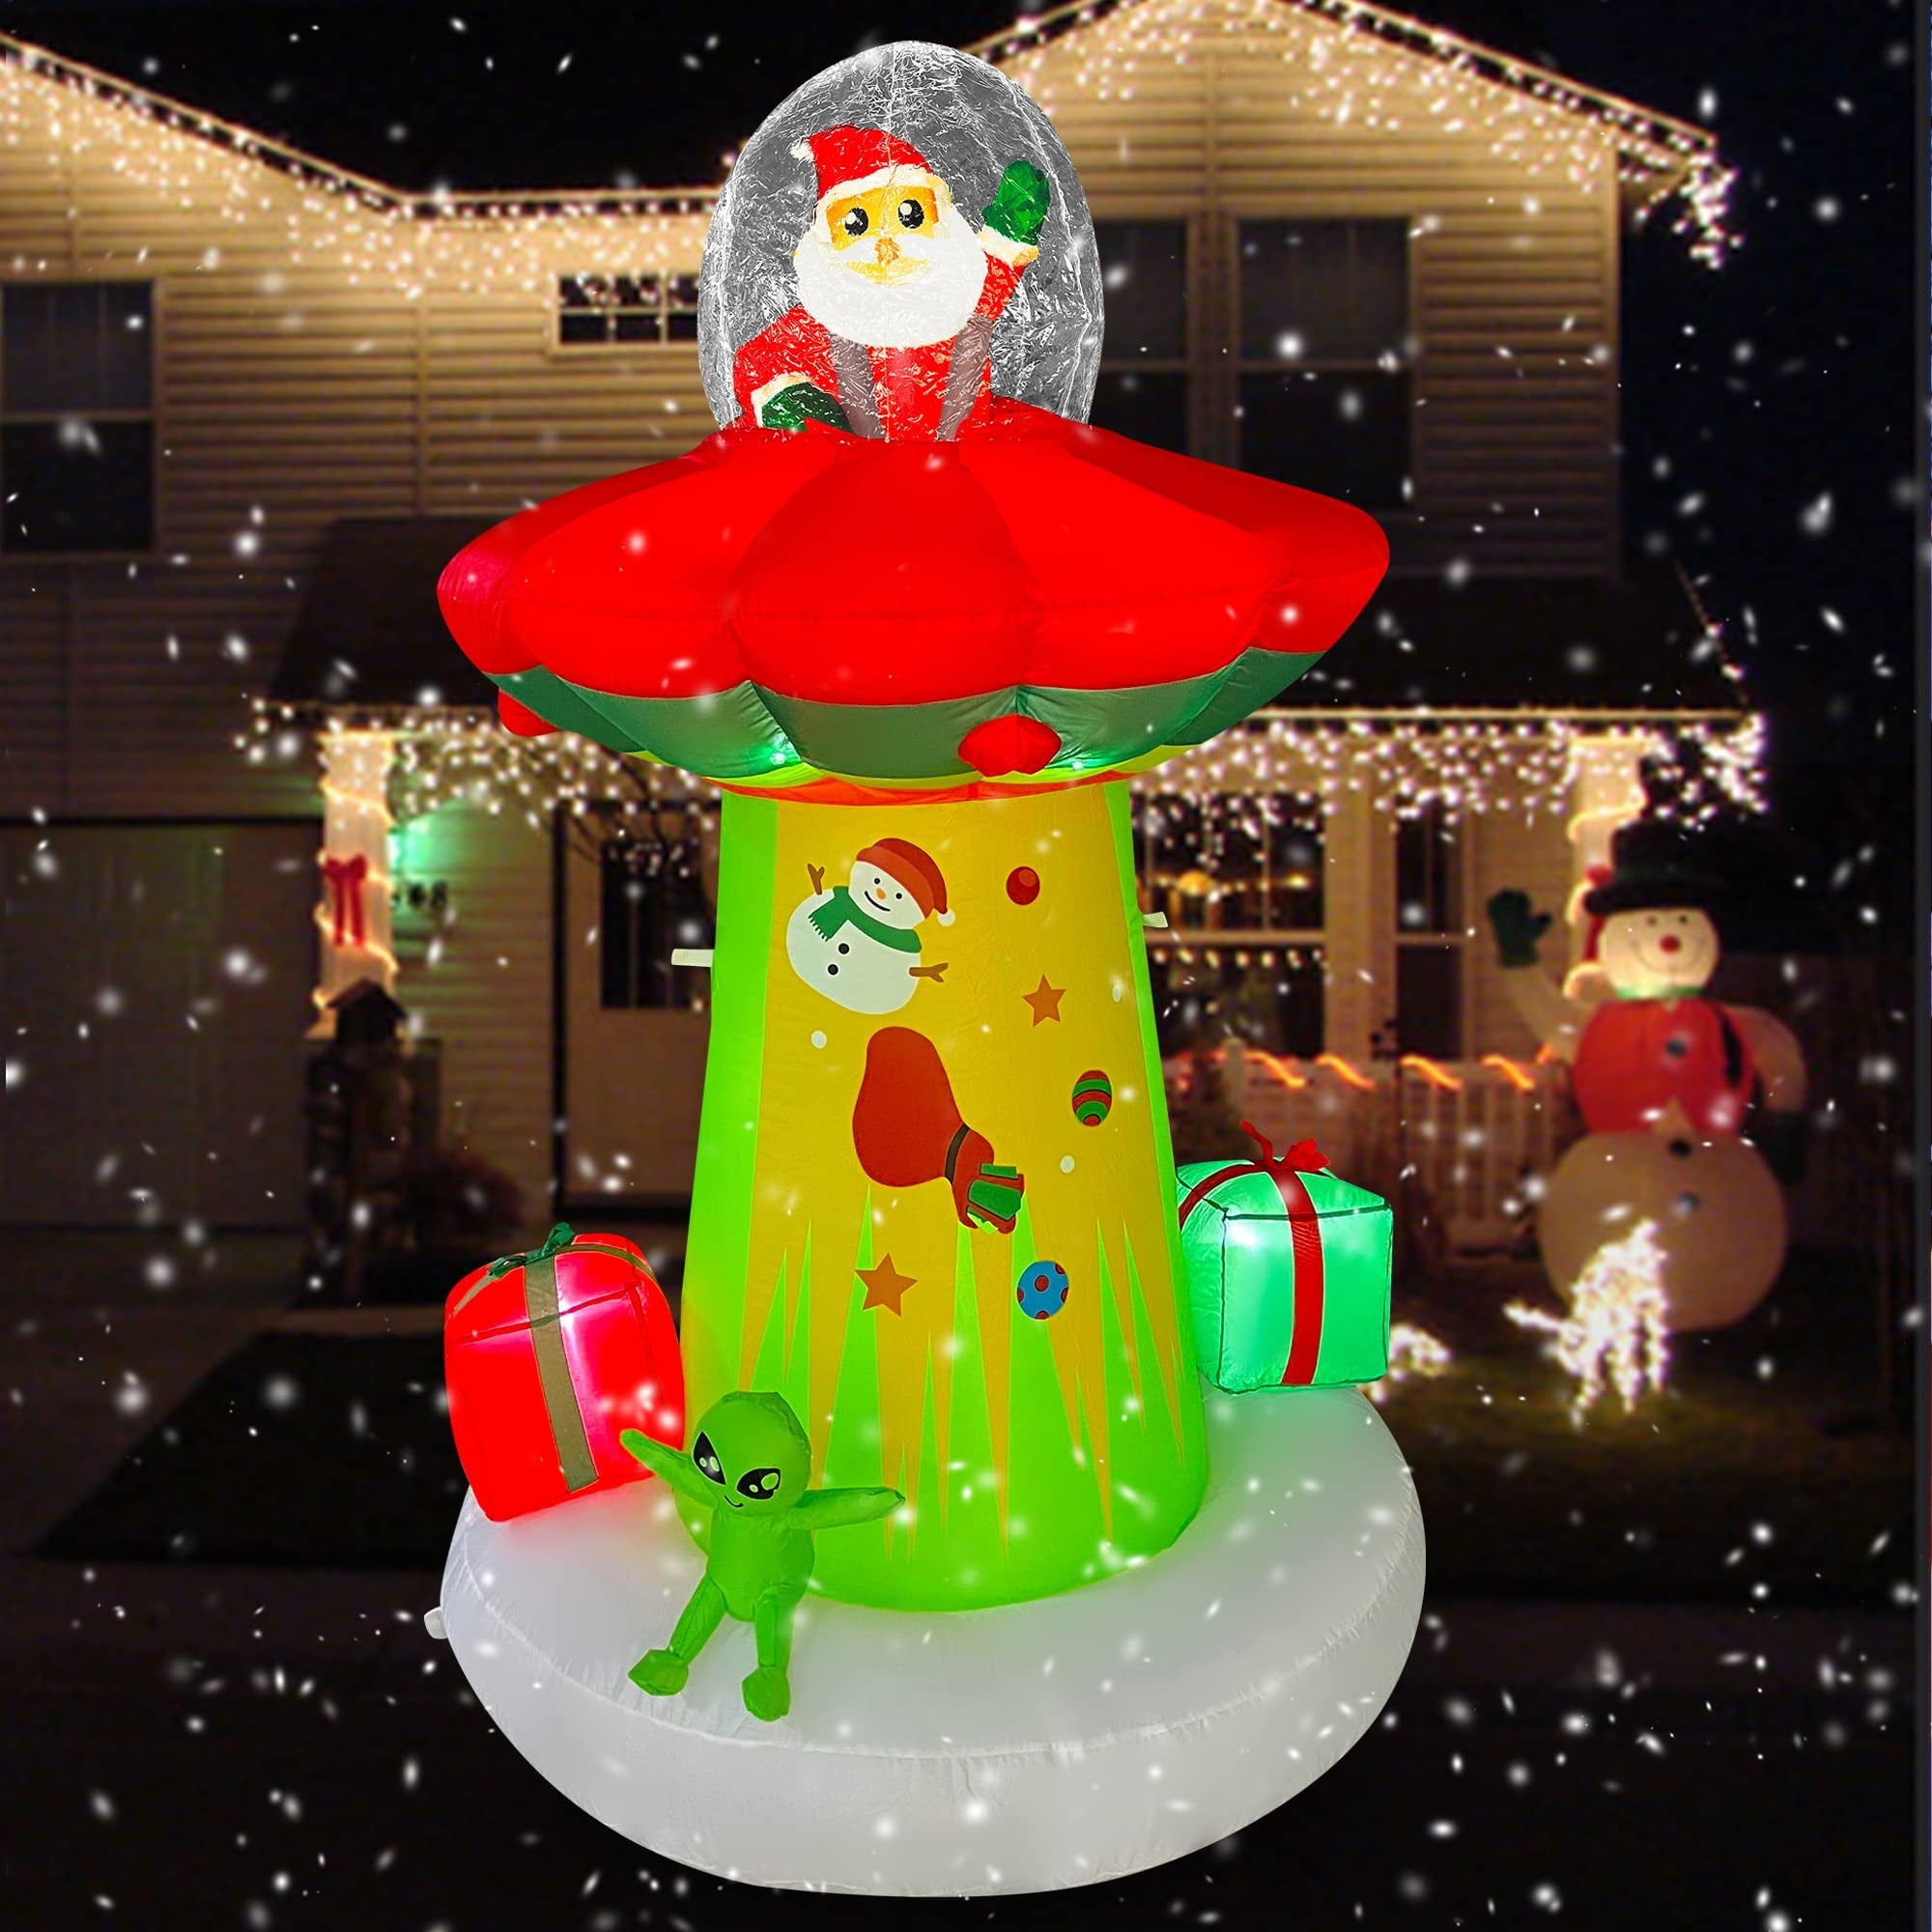 Christmas Inflatables Outdoor Decorations, Inflatables Ufo with Santa and Alien, 7ft Christmas Blow Up Yard Decorations with LED Lights for Xmas Party